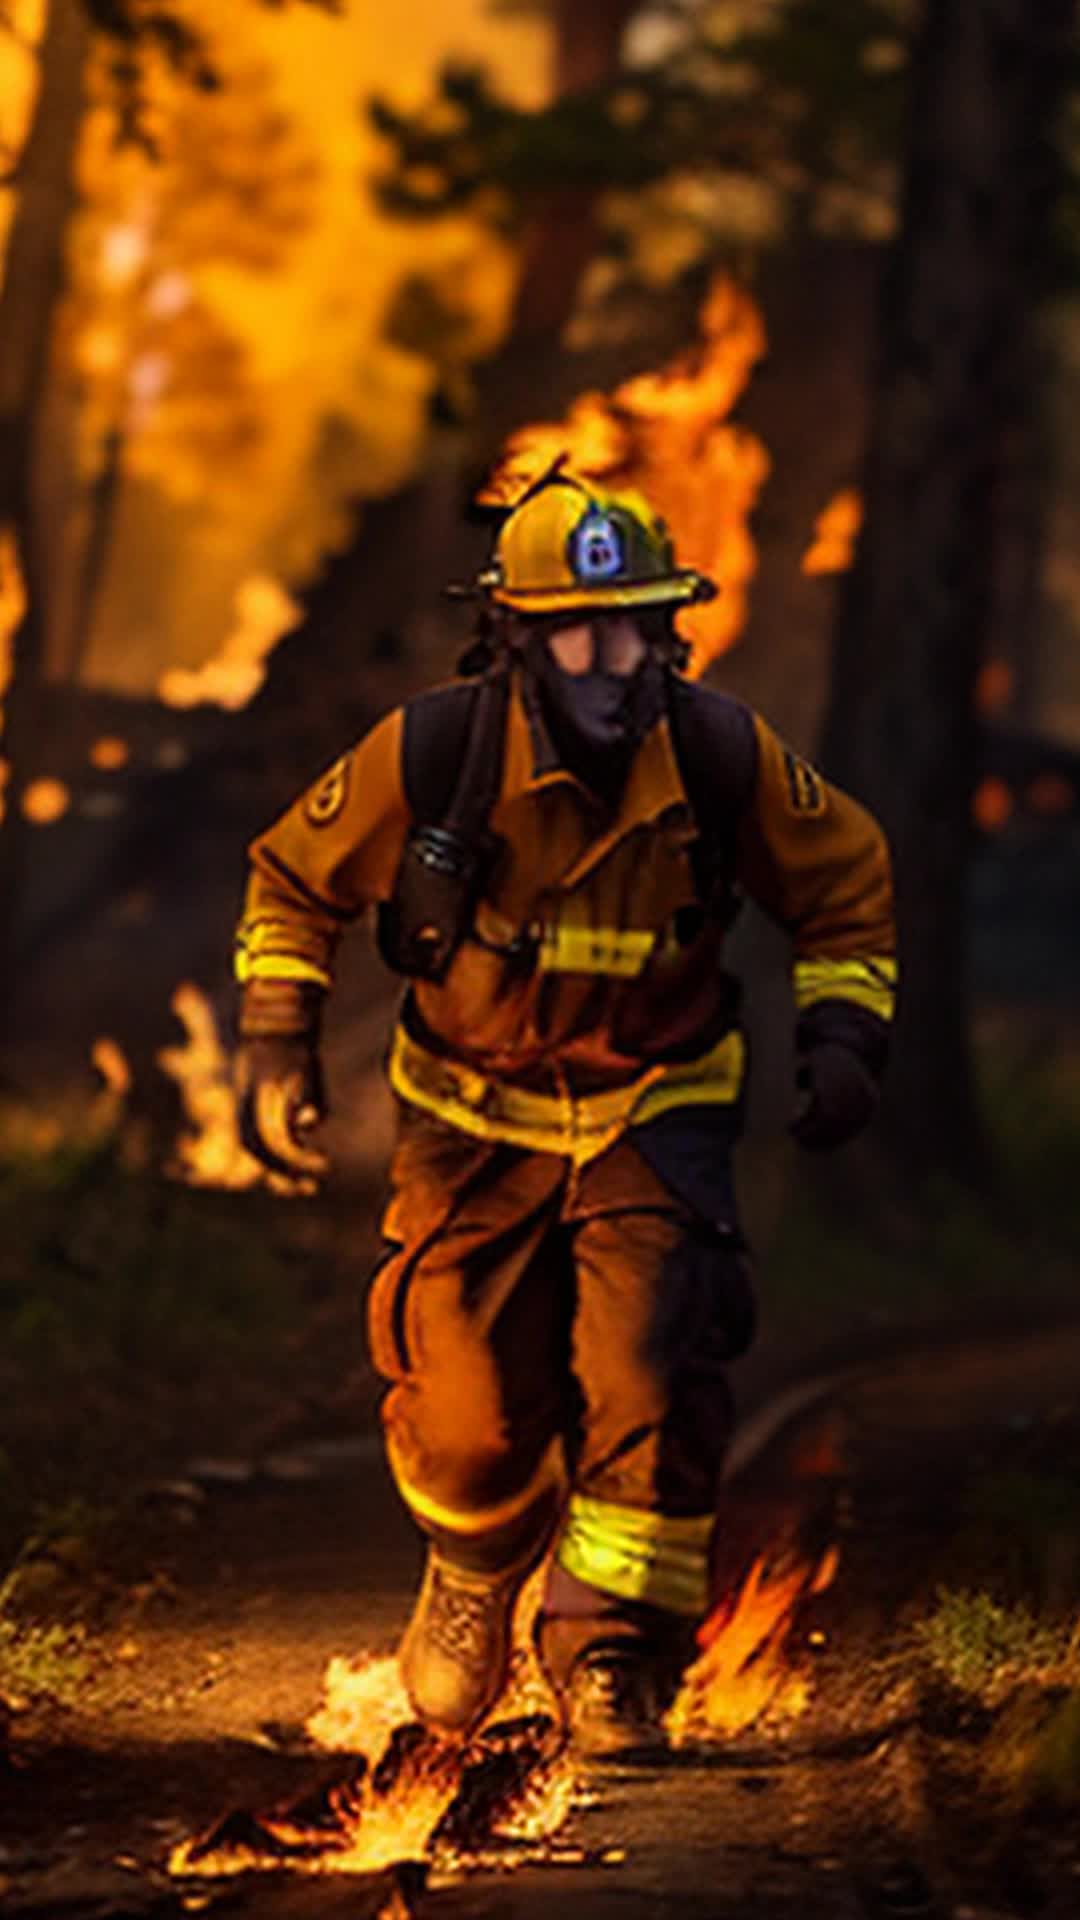 Teenage volunteer firefighter sprinting, crackling underbrush, rare fire-resistant plant clutched, flames dancing close, vivid orange and red hues, urgent motion, intense wildfire background, high-stakes atmosphere